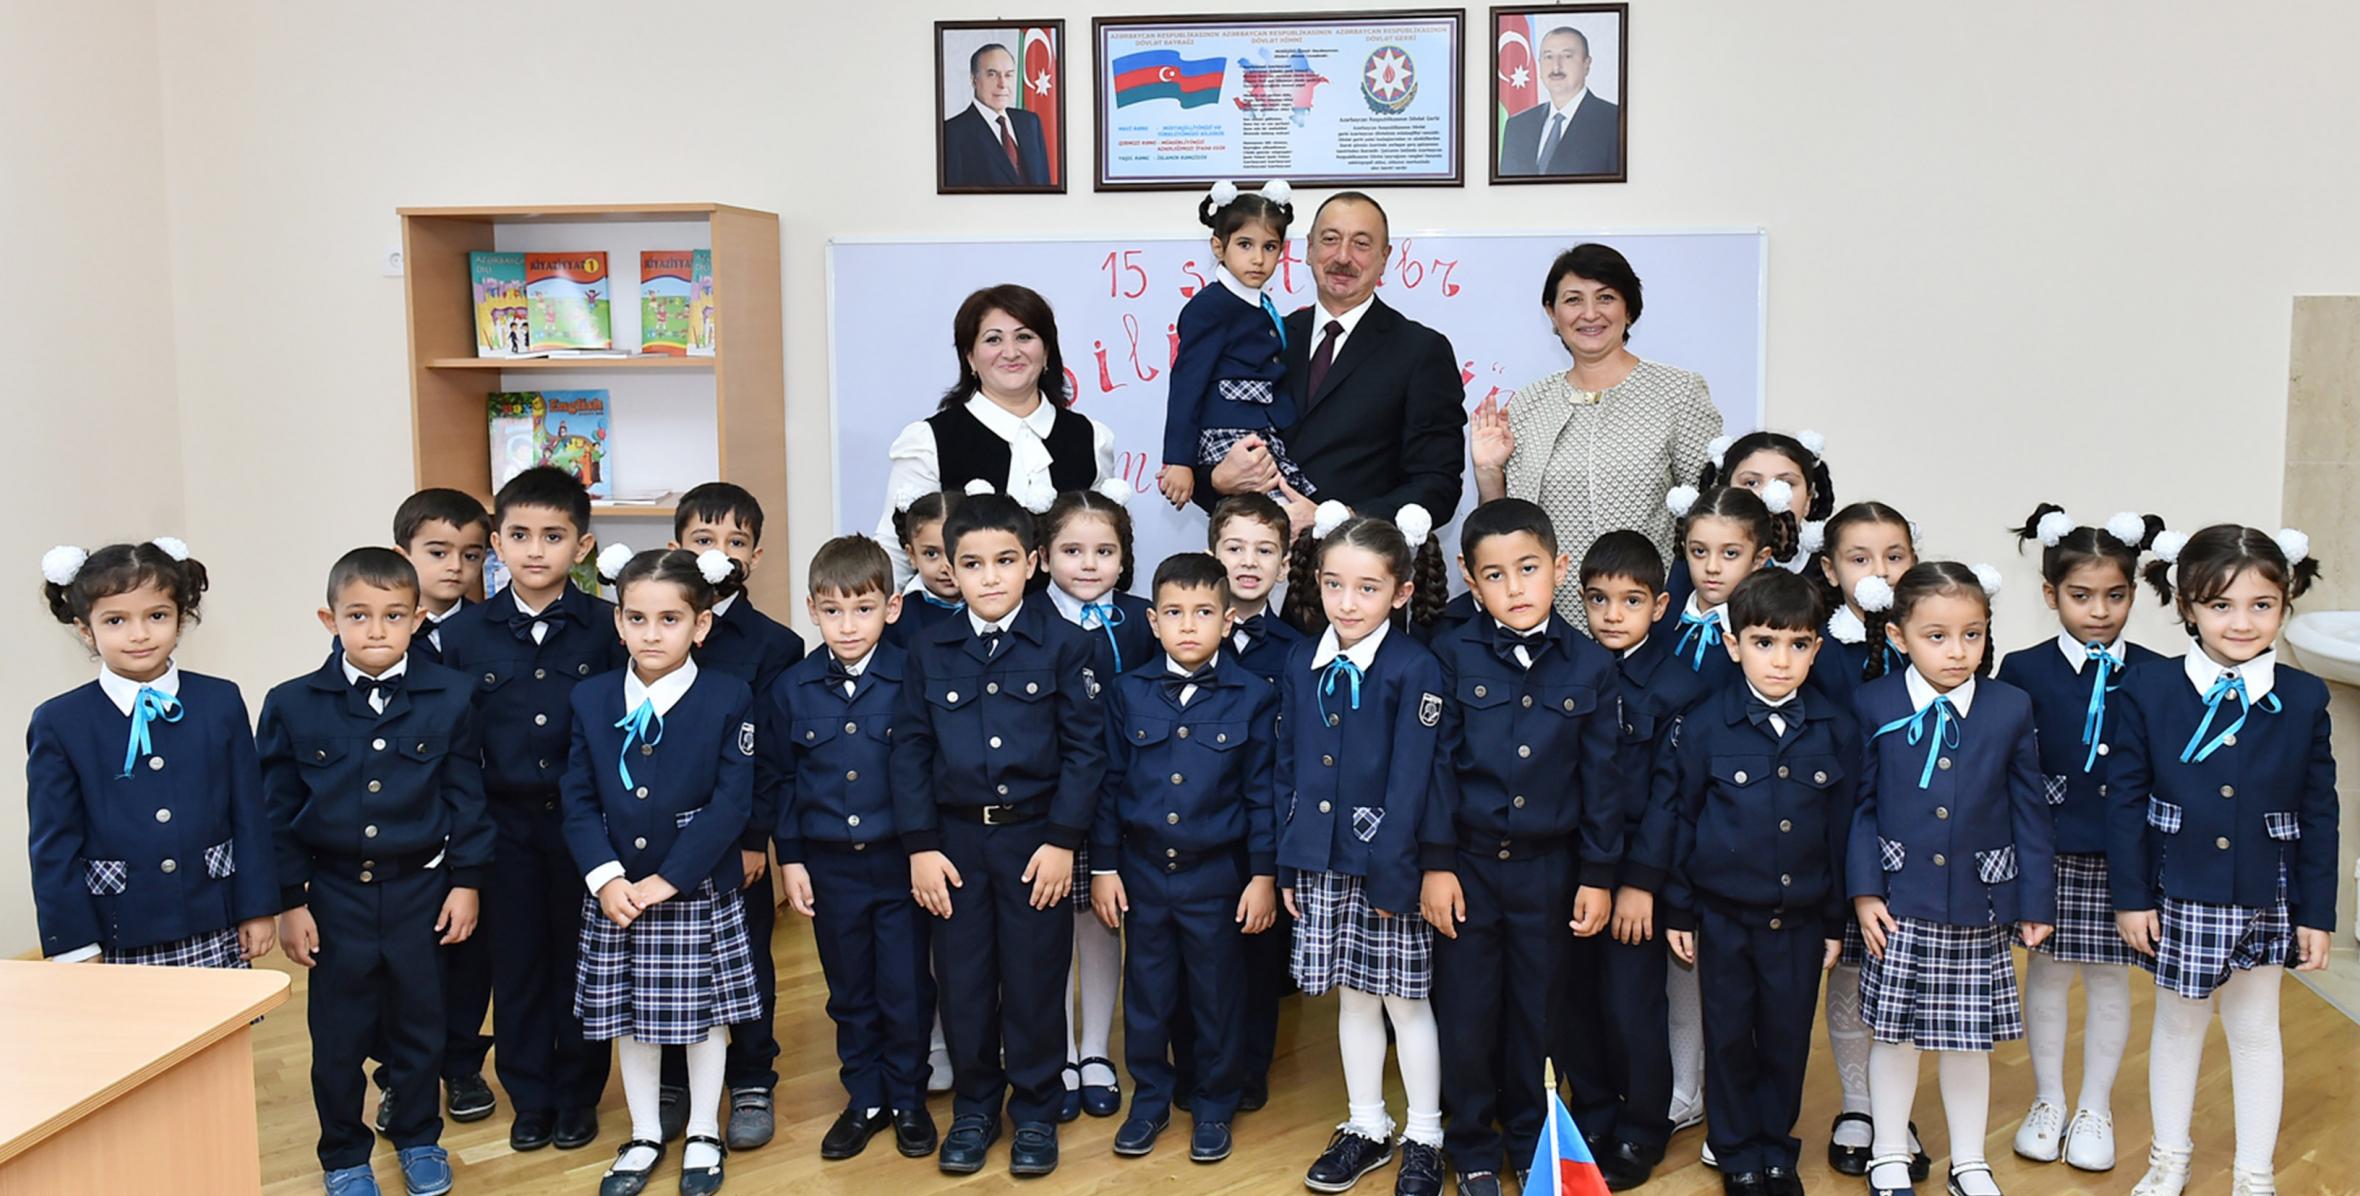 Ilham Aliyev attended opening of new building of school No. 311 in Sabunchu